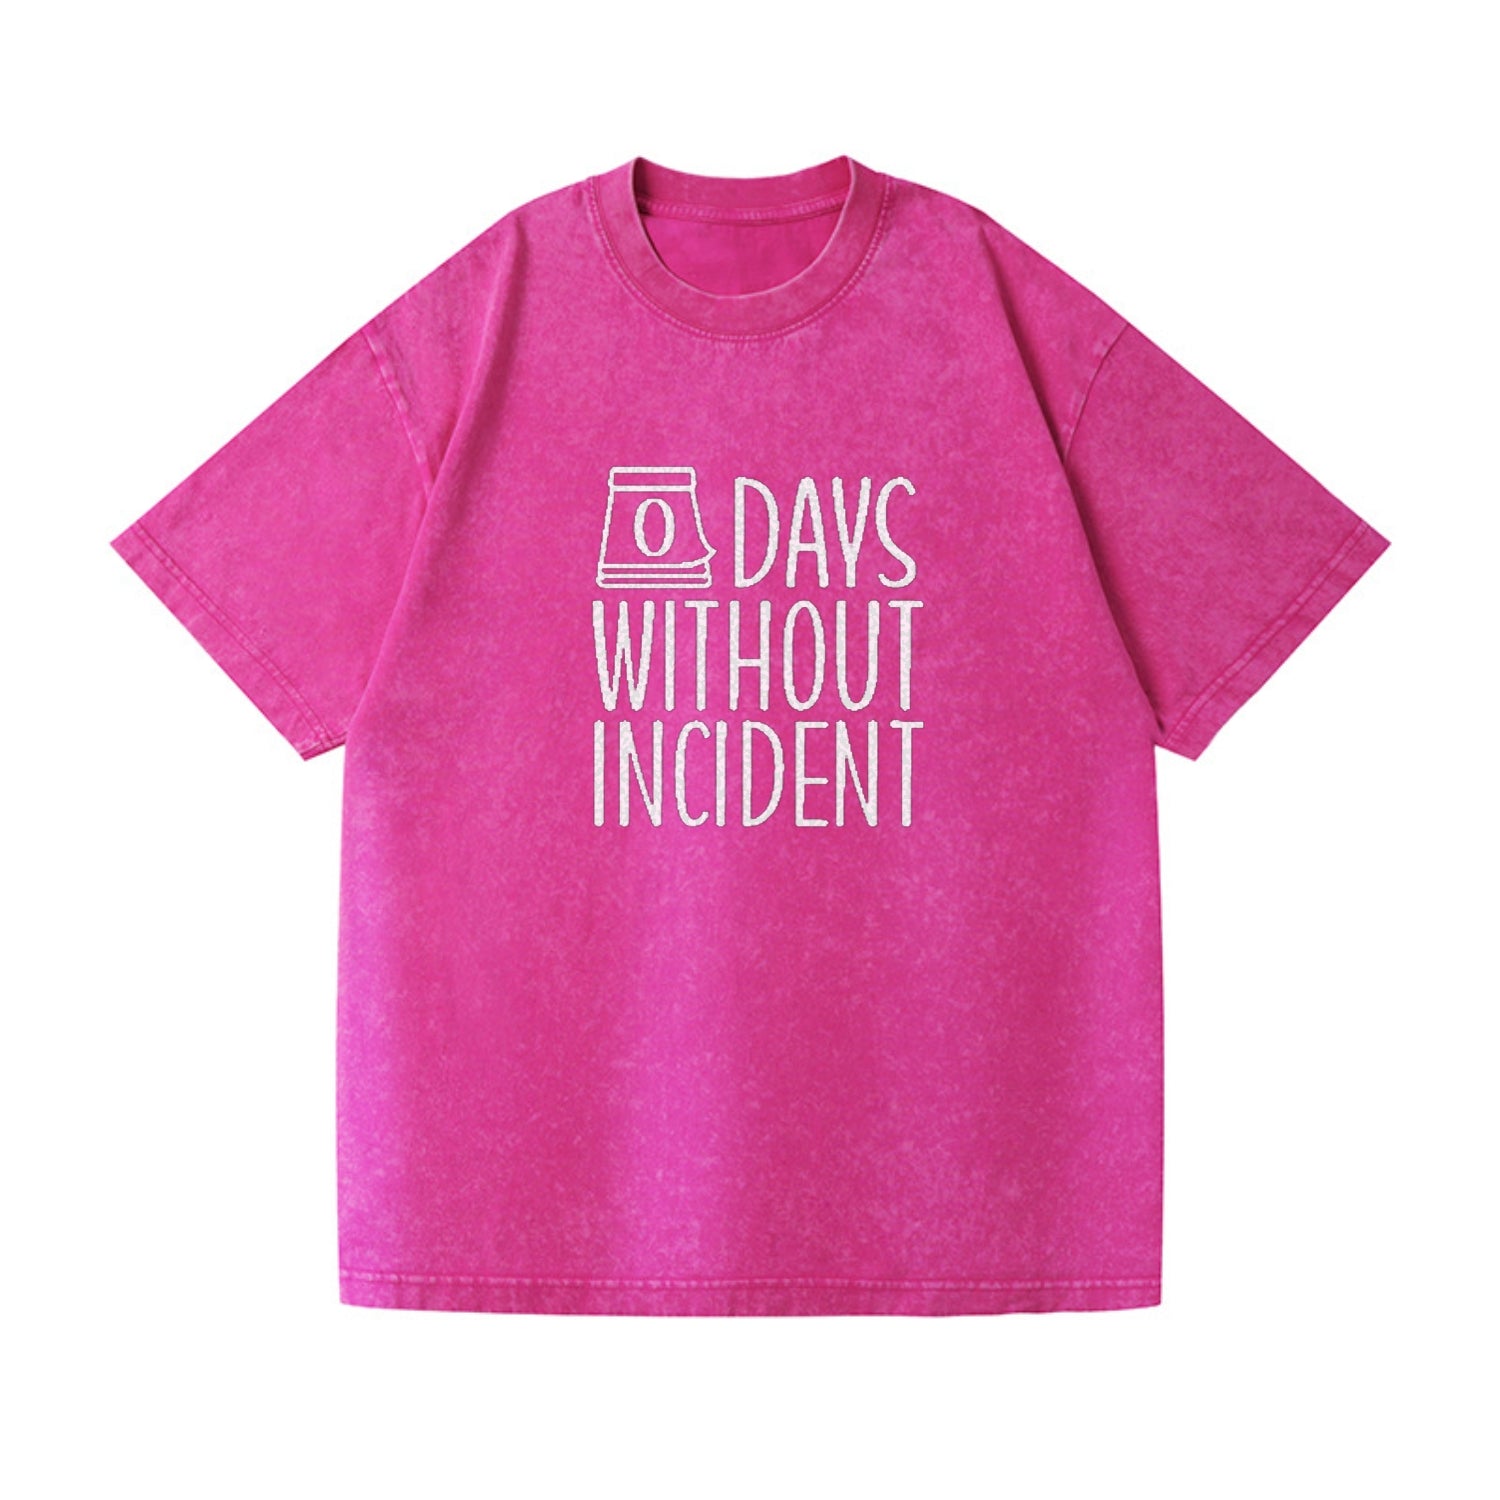 zero days without incident Hat